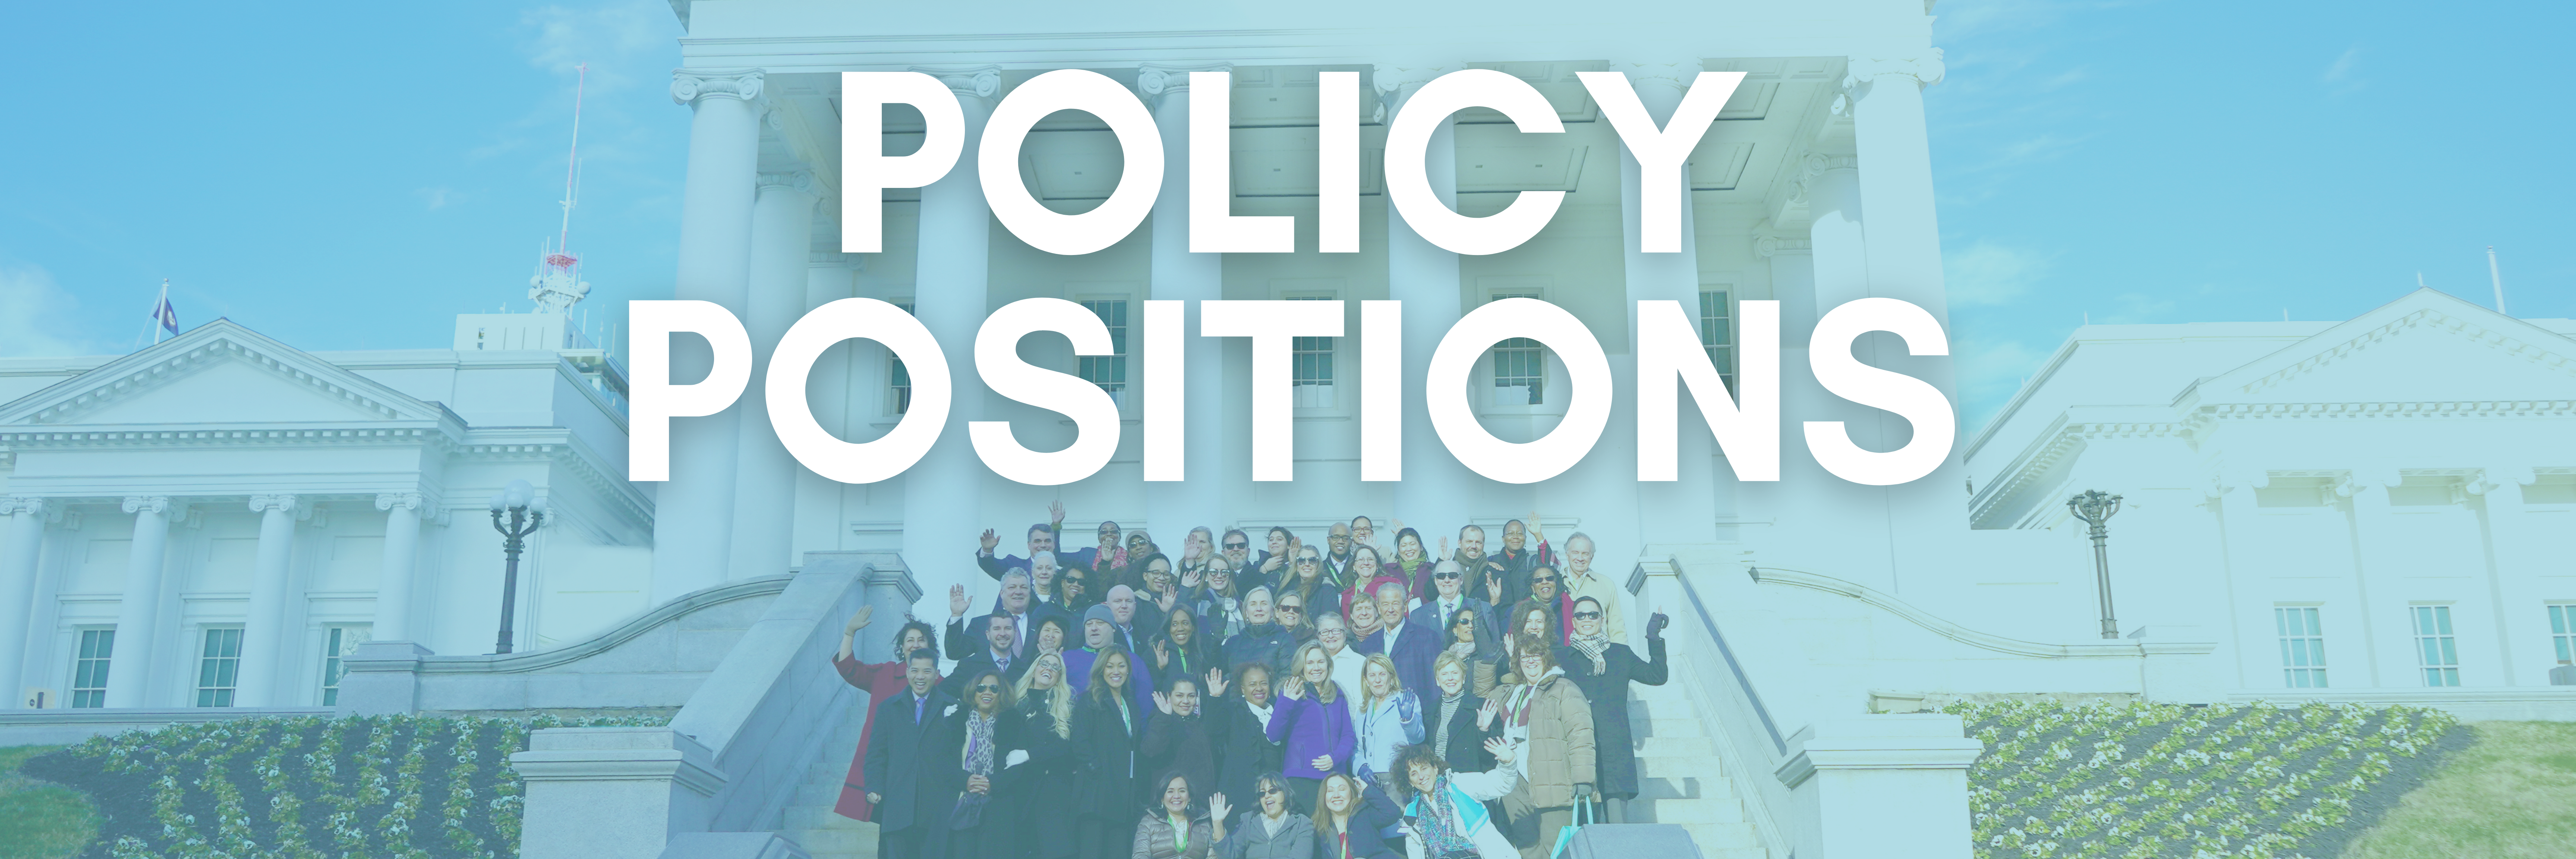 policy positions banner (1)